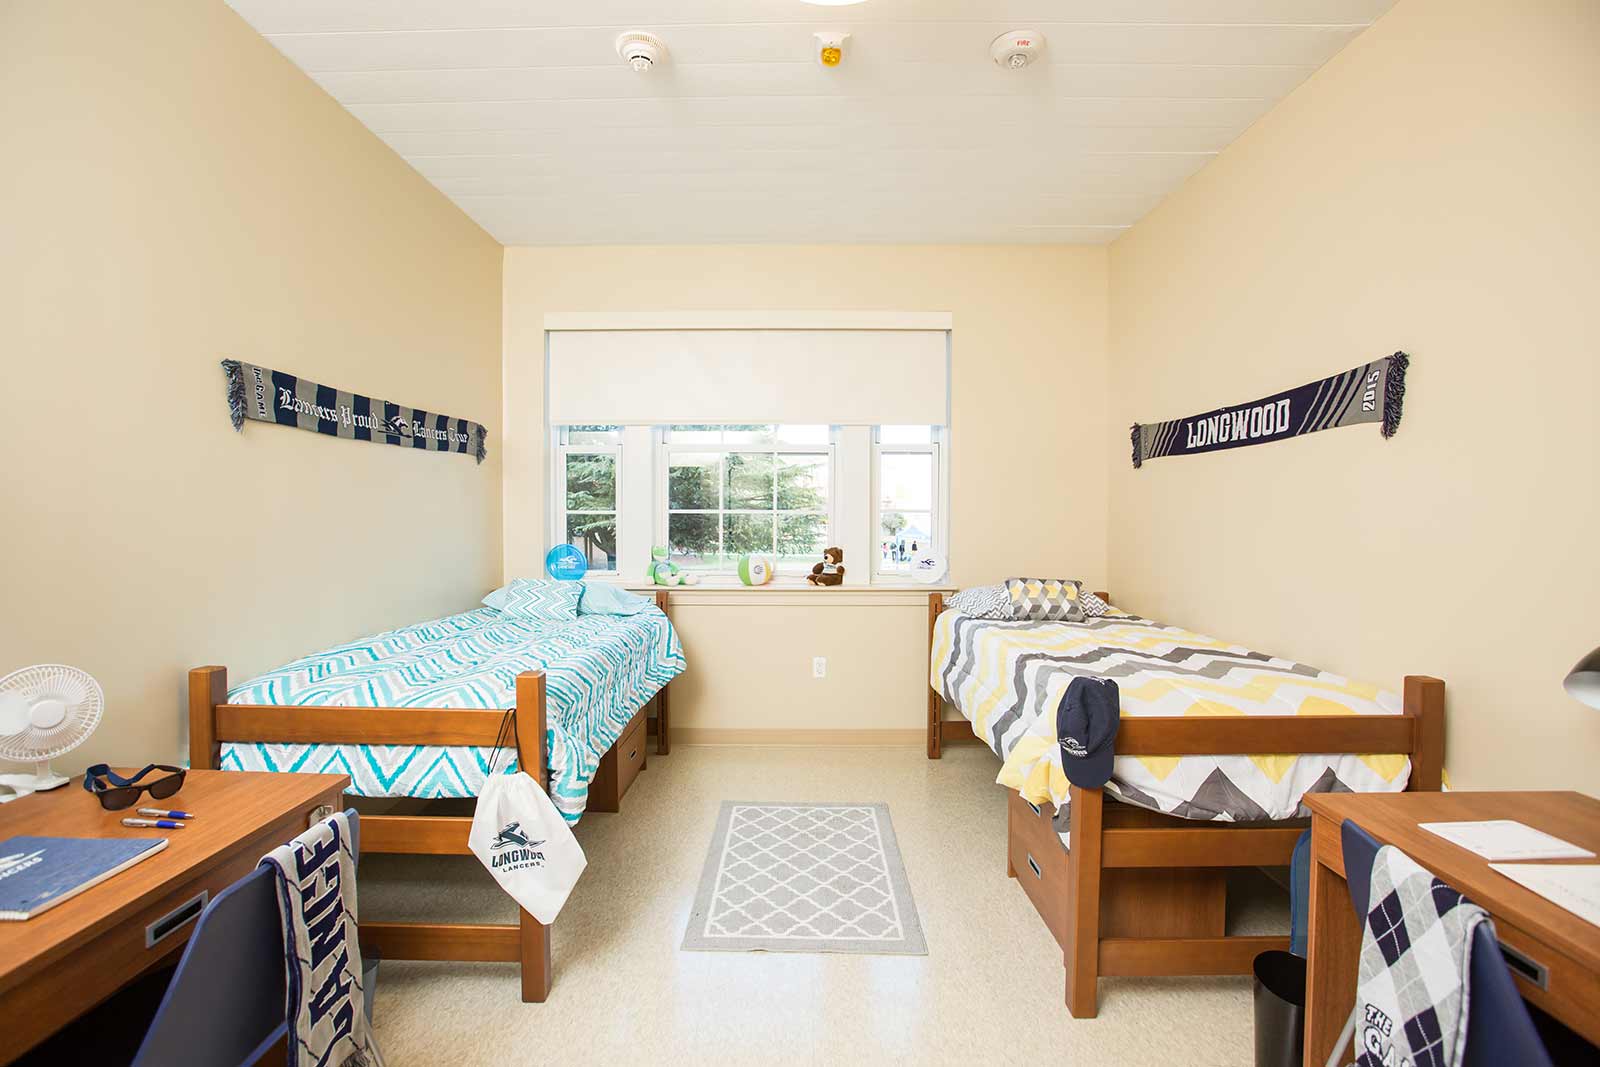 Longwood’s residence halls have both hall-style and suite-style living spaces with spacious rooms ready to be decorated. The central location of on-campus residences means it’s never more than a few minutes’ walk from your room to class, D-Hall or a restaurant downtown!